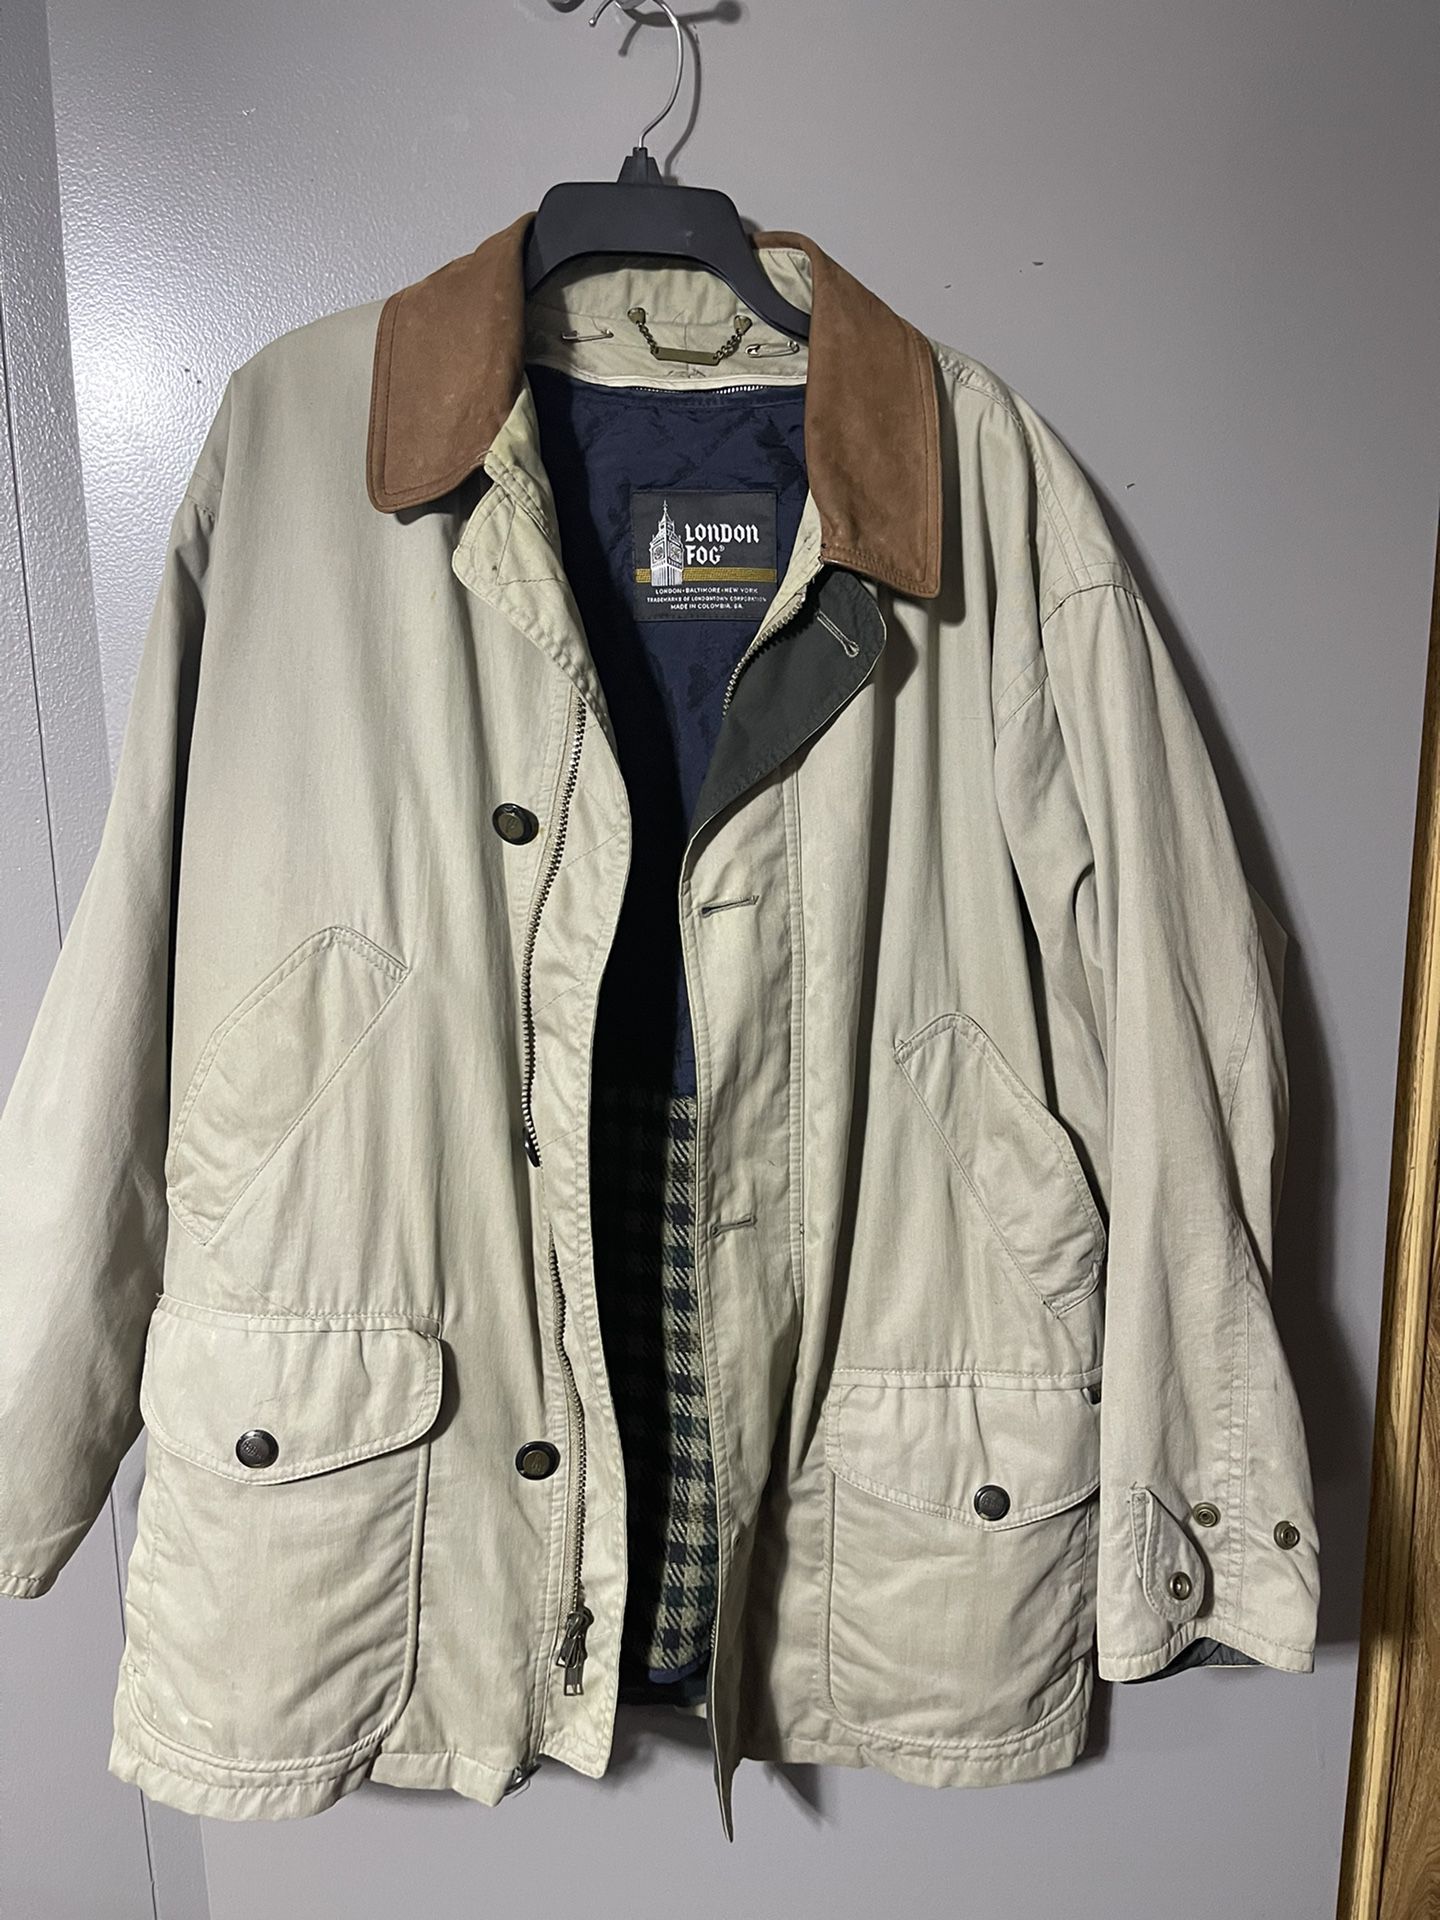 Used London Fog man coat thinsulate 3M with zip out lining, 4 pockets on the front,  Leather collar, dry clean only, zip and button closure size M Reg